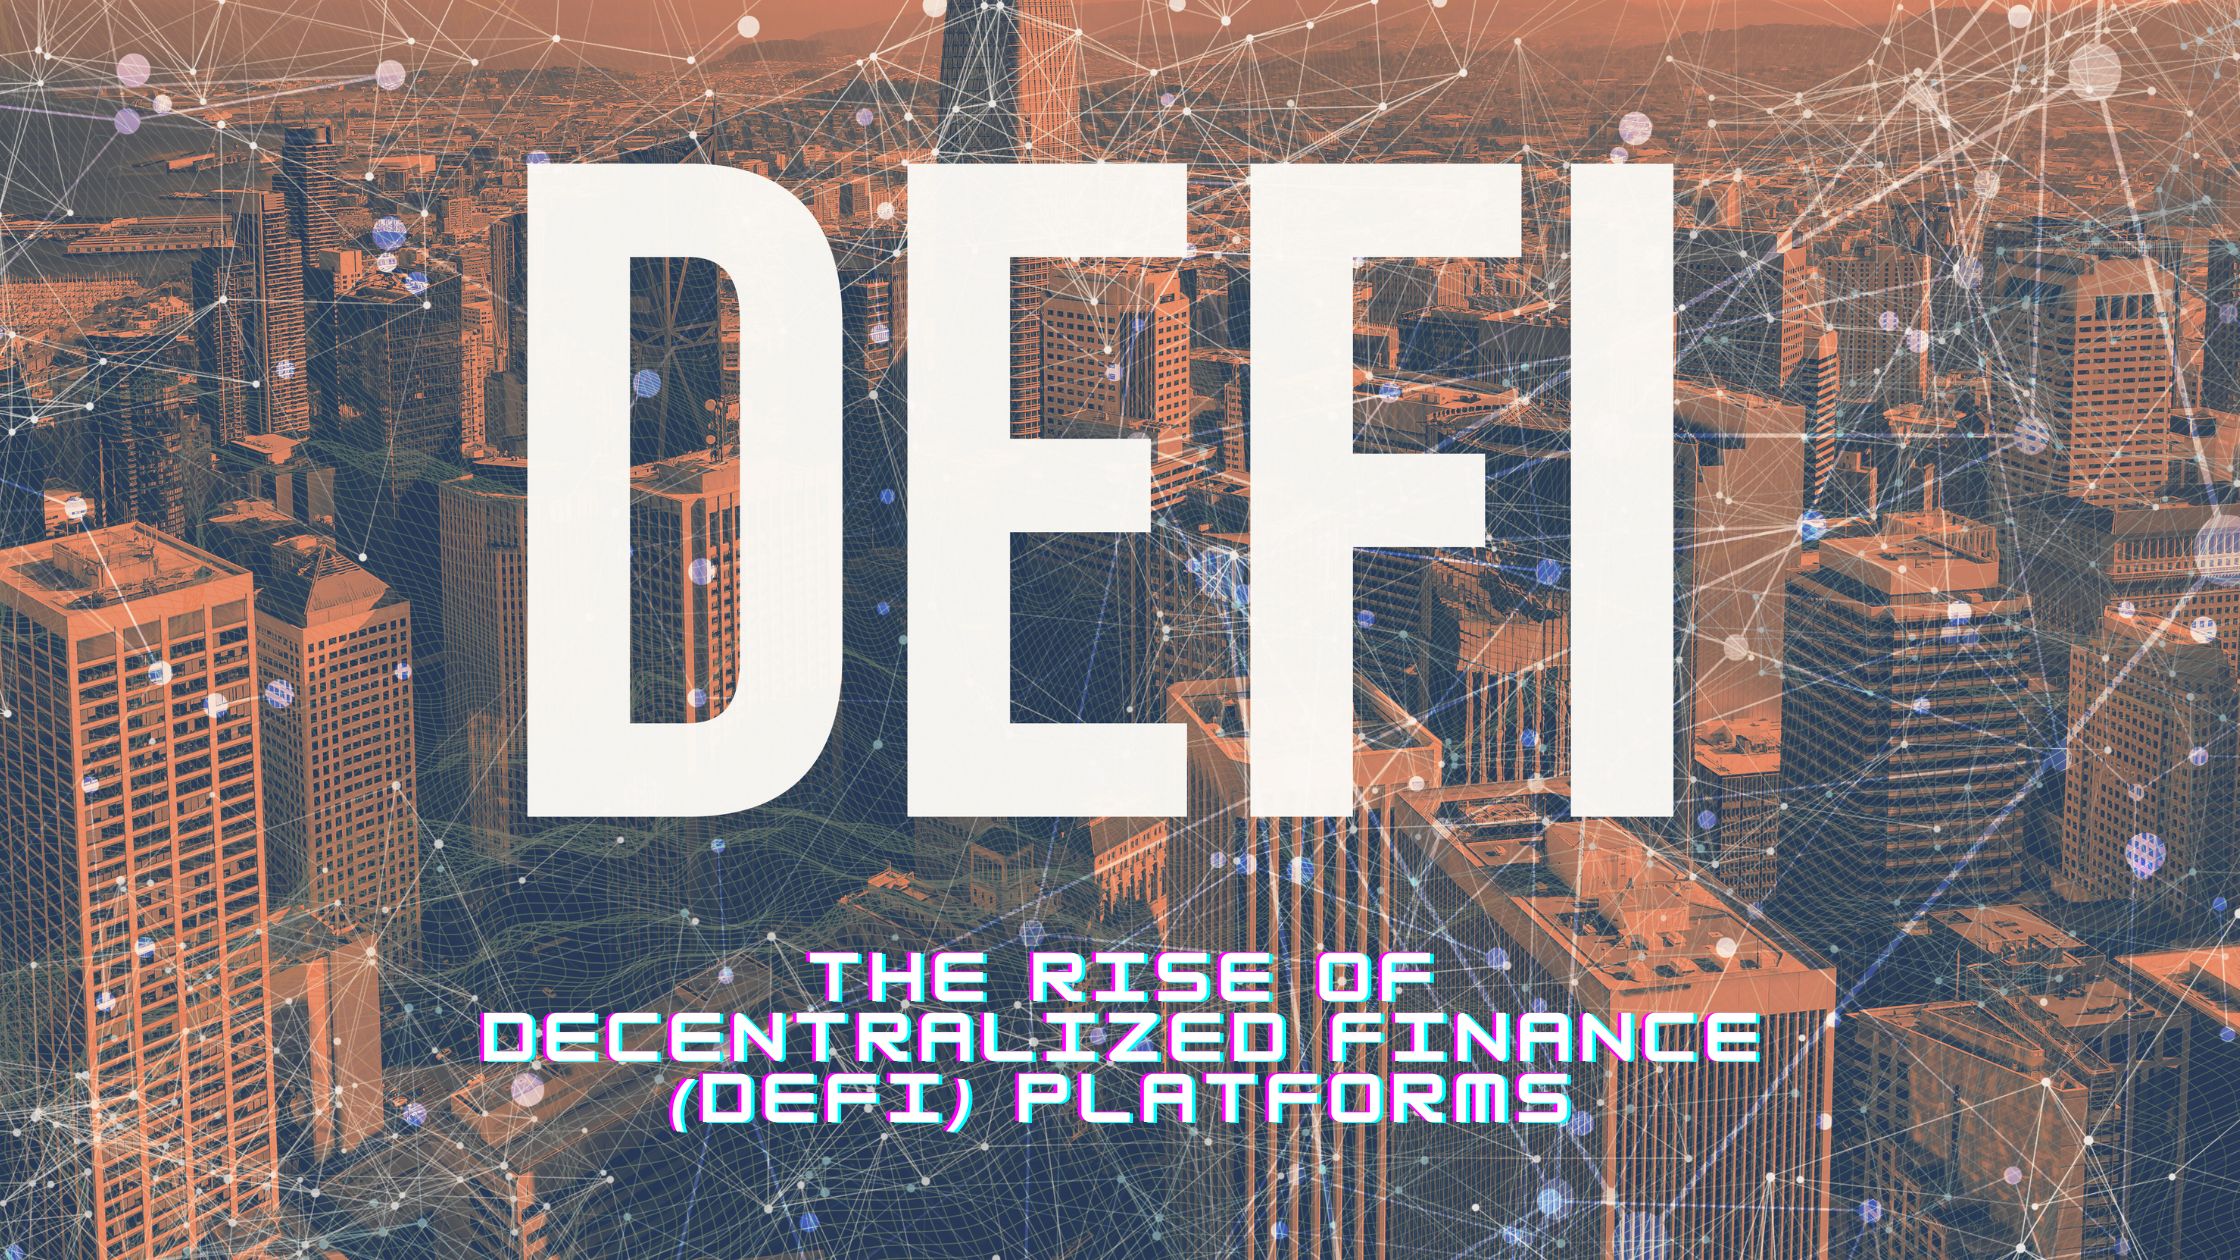 You are currently viewing The Rise of Decentralized Finance (DeFi) Platforms